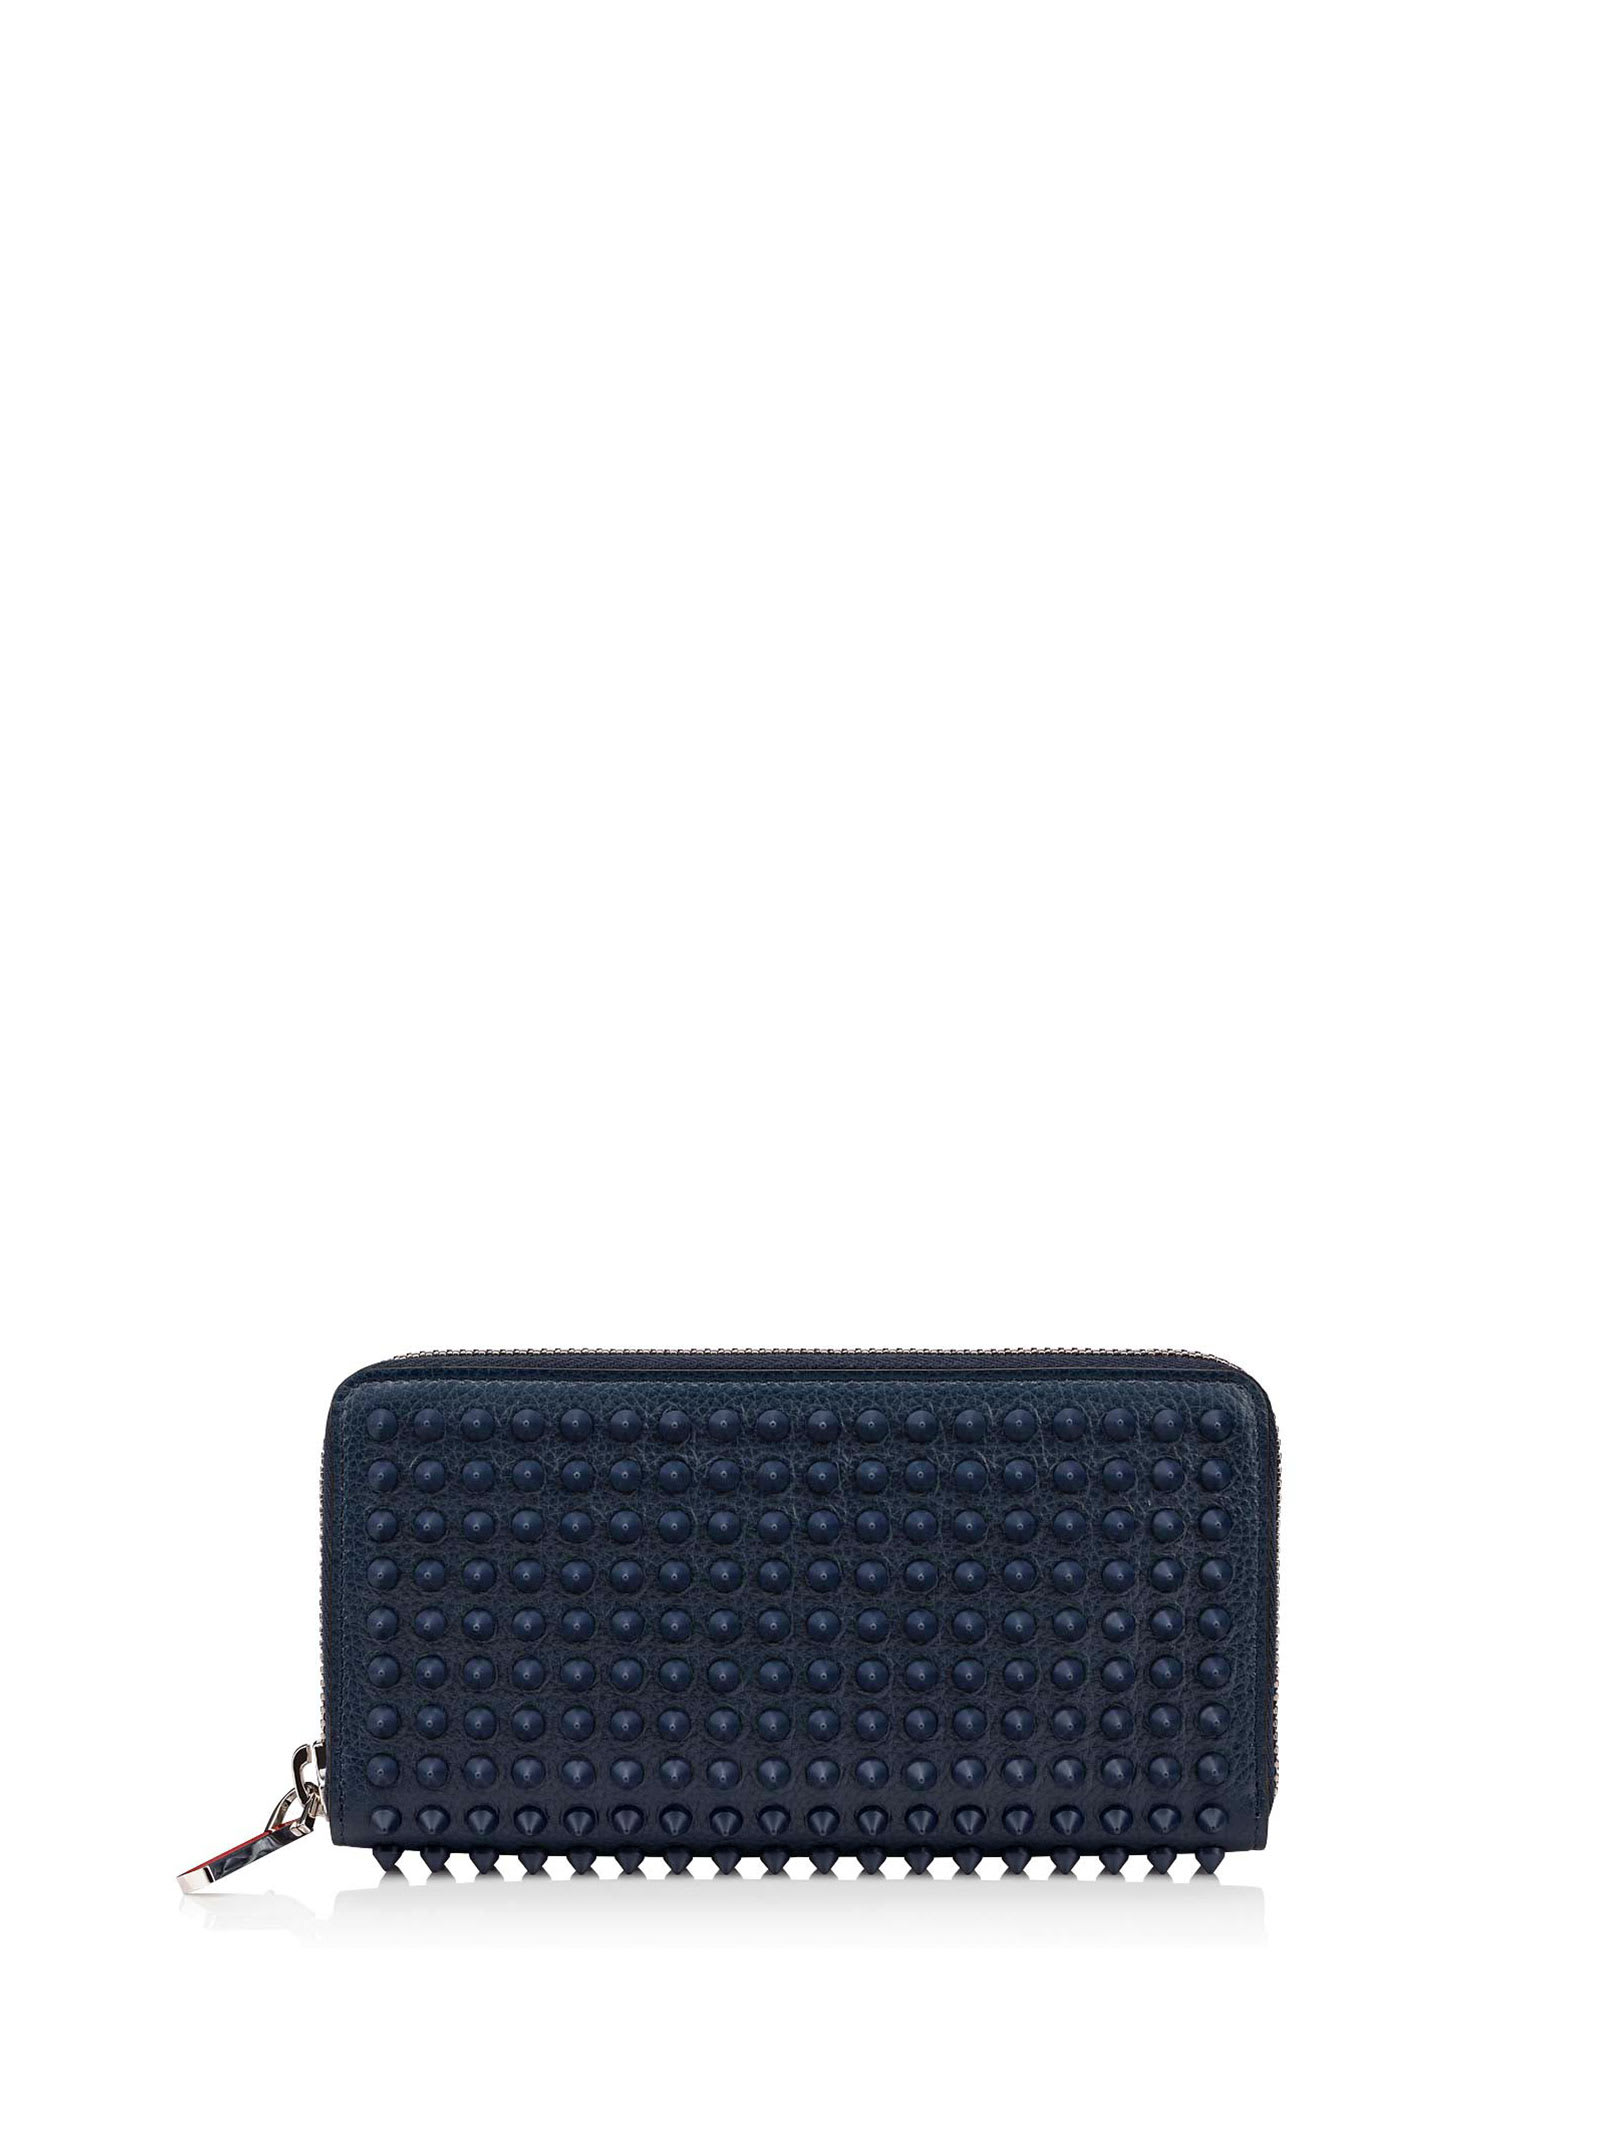 Christian Louboutin Wallet With Studs